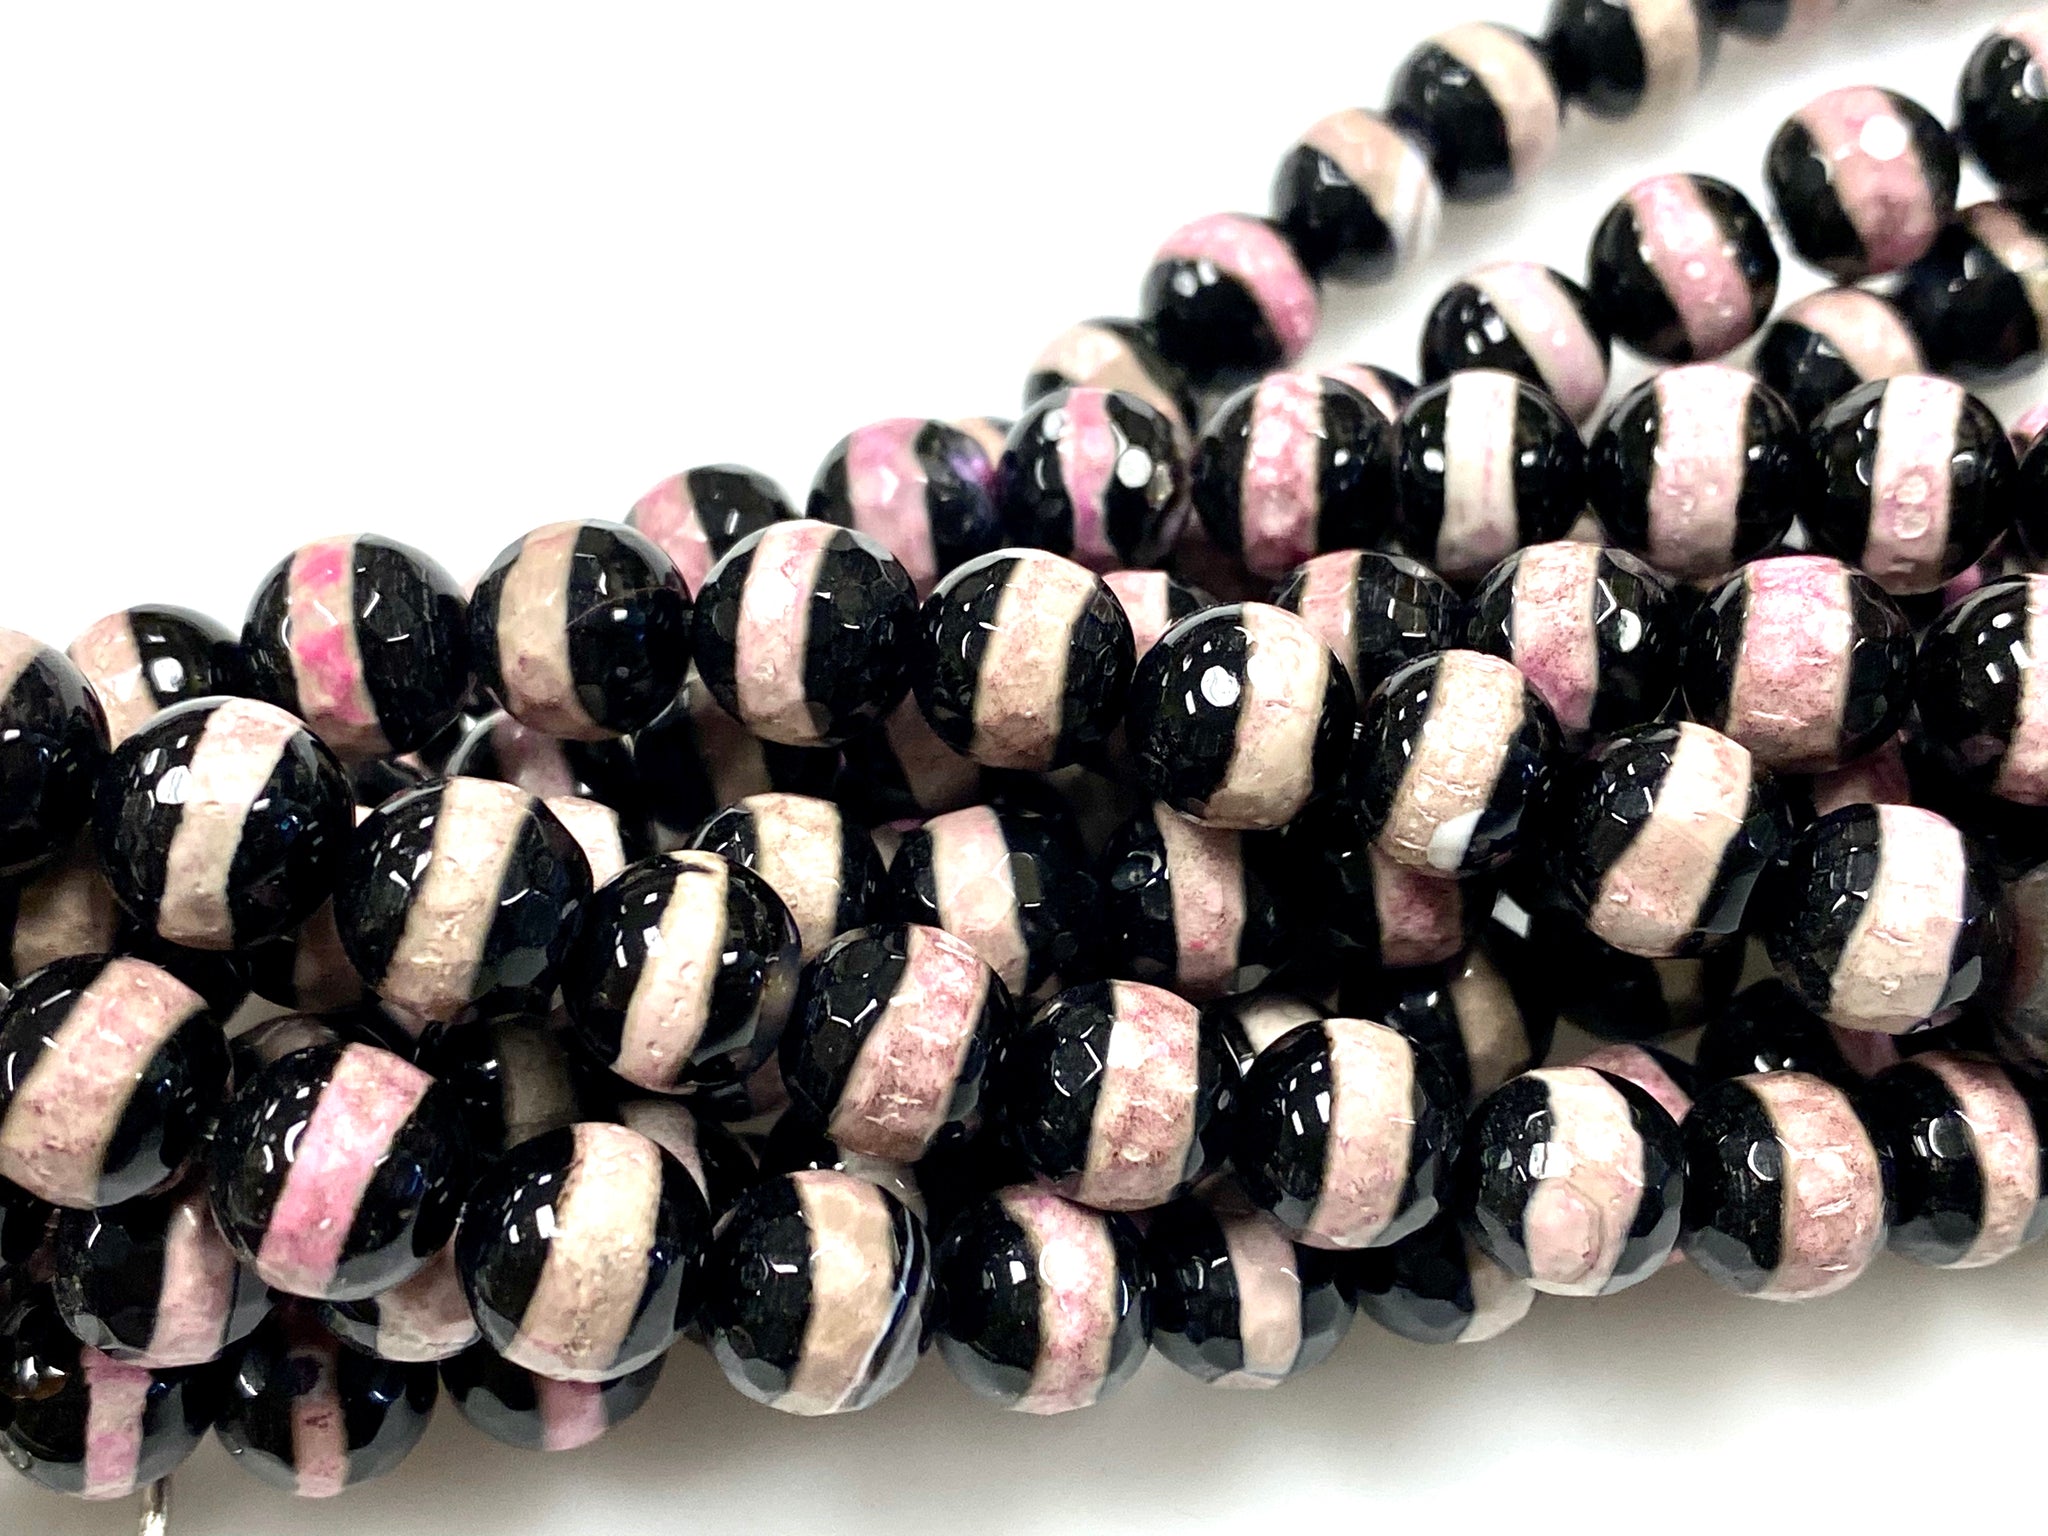 Natural Black Stripe Onyx Beads / Faceted Round Shape Beads / Healing Energy Stone Beads / 8mm 2 Strands Beads